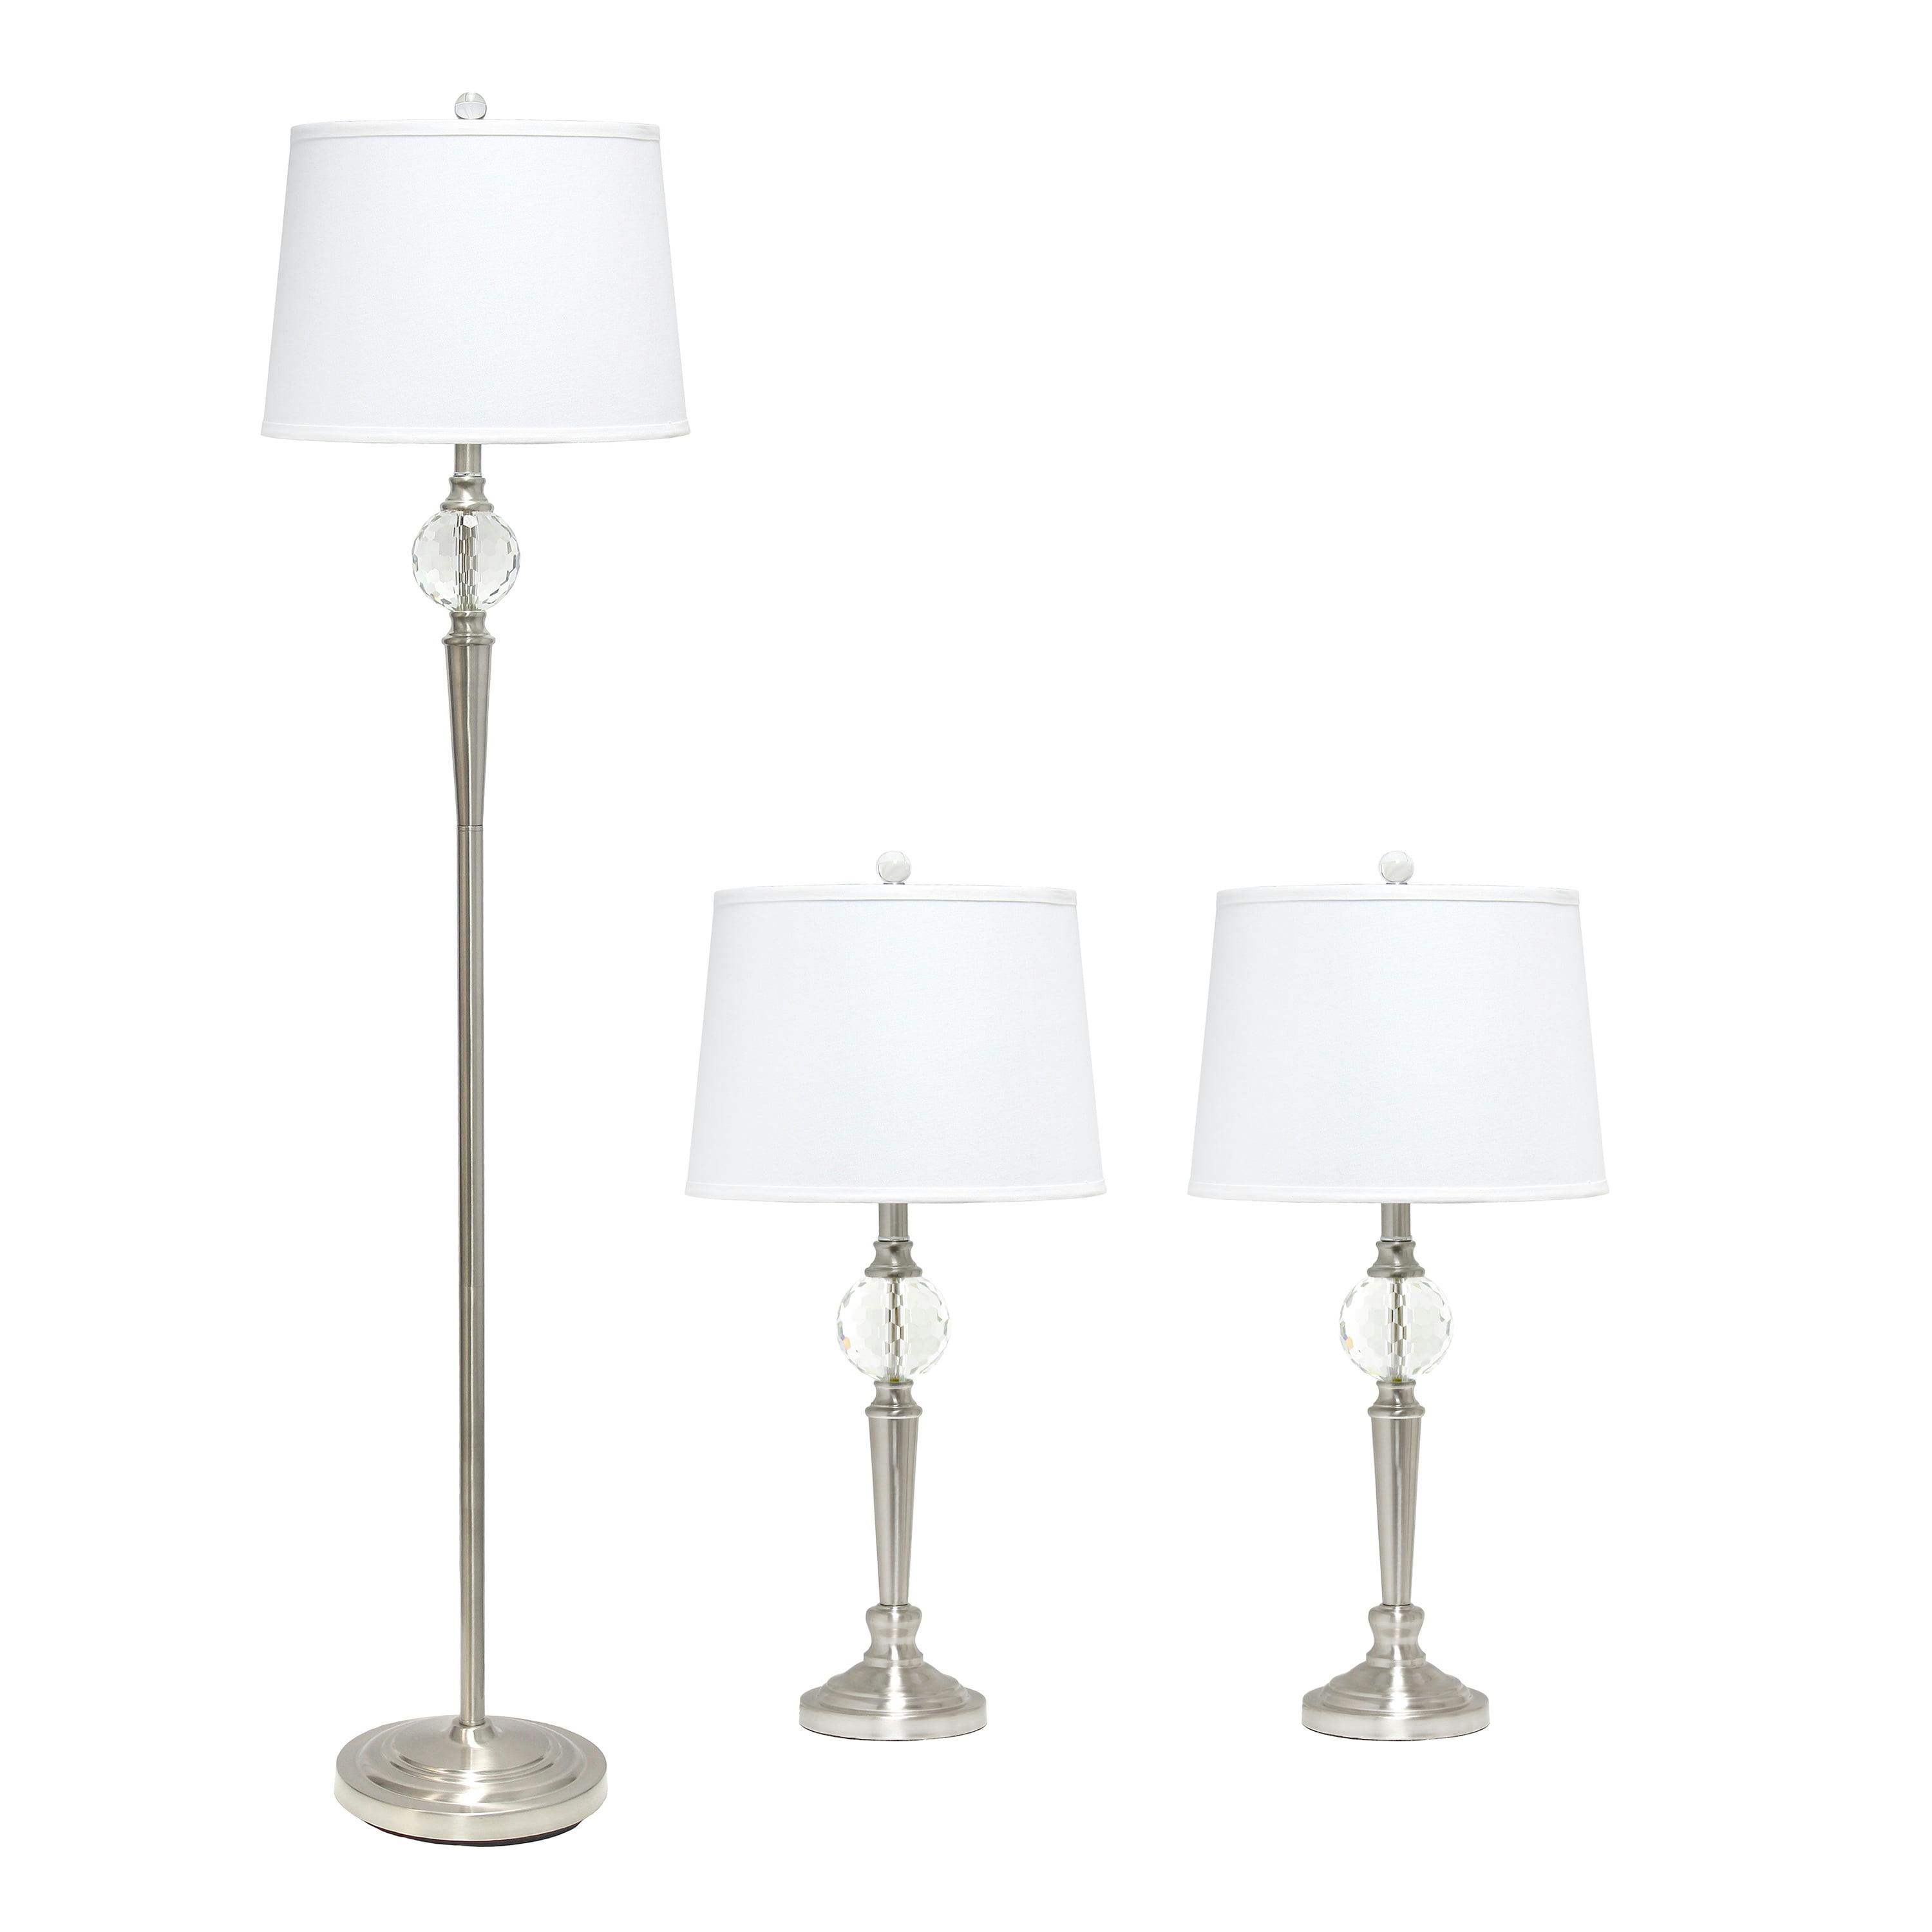 Elegant Silver Crystal Drop Floor & Table Lamp Trio Set with White Shades